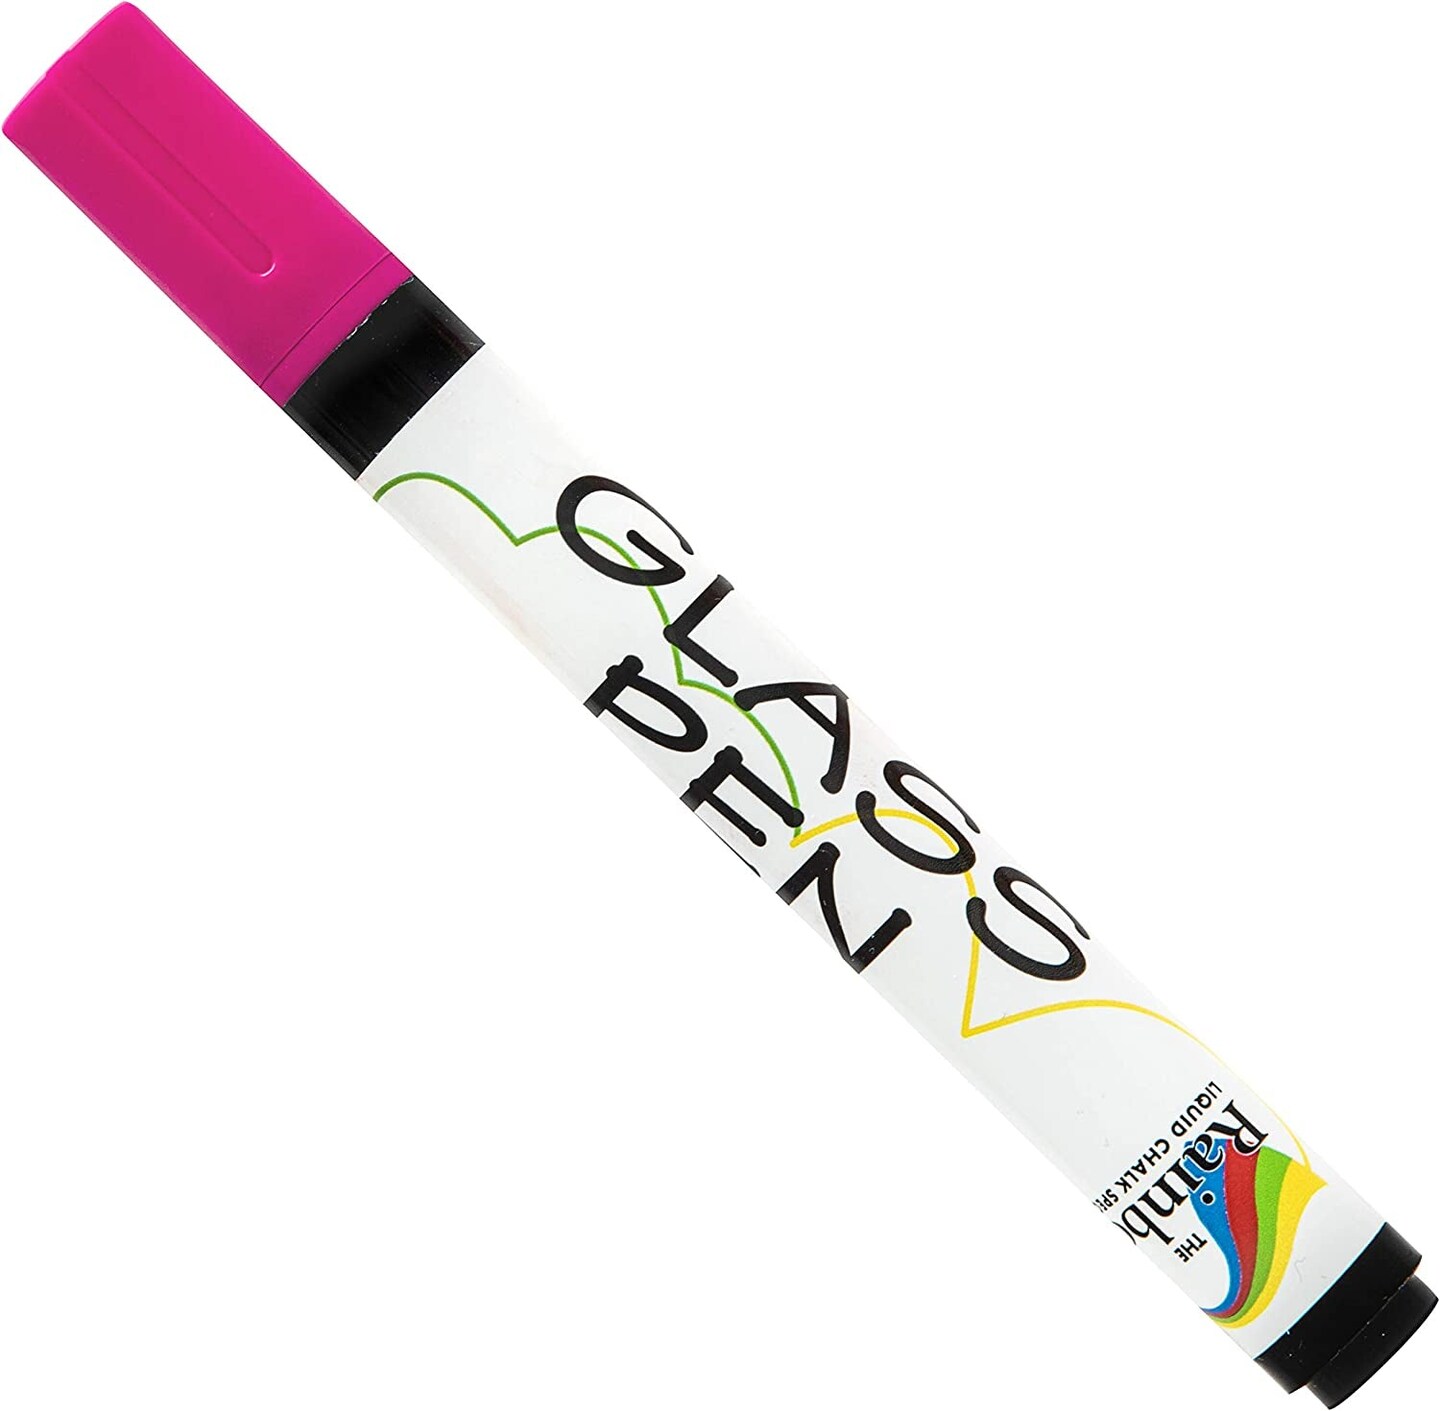 Glass Pen Window Marker: Liquid Chalk Markers for Glass, Car Marker or  Mirror Pen with Washable Paint - Car Windows, Storefront Window, Wedding,  Parade, Party & Holiday Decorations (White, Fine Tip)